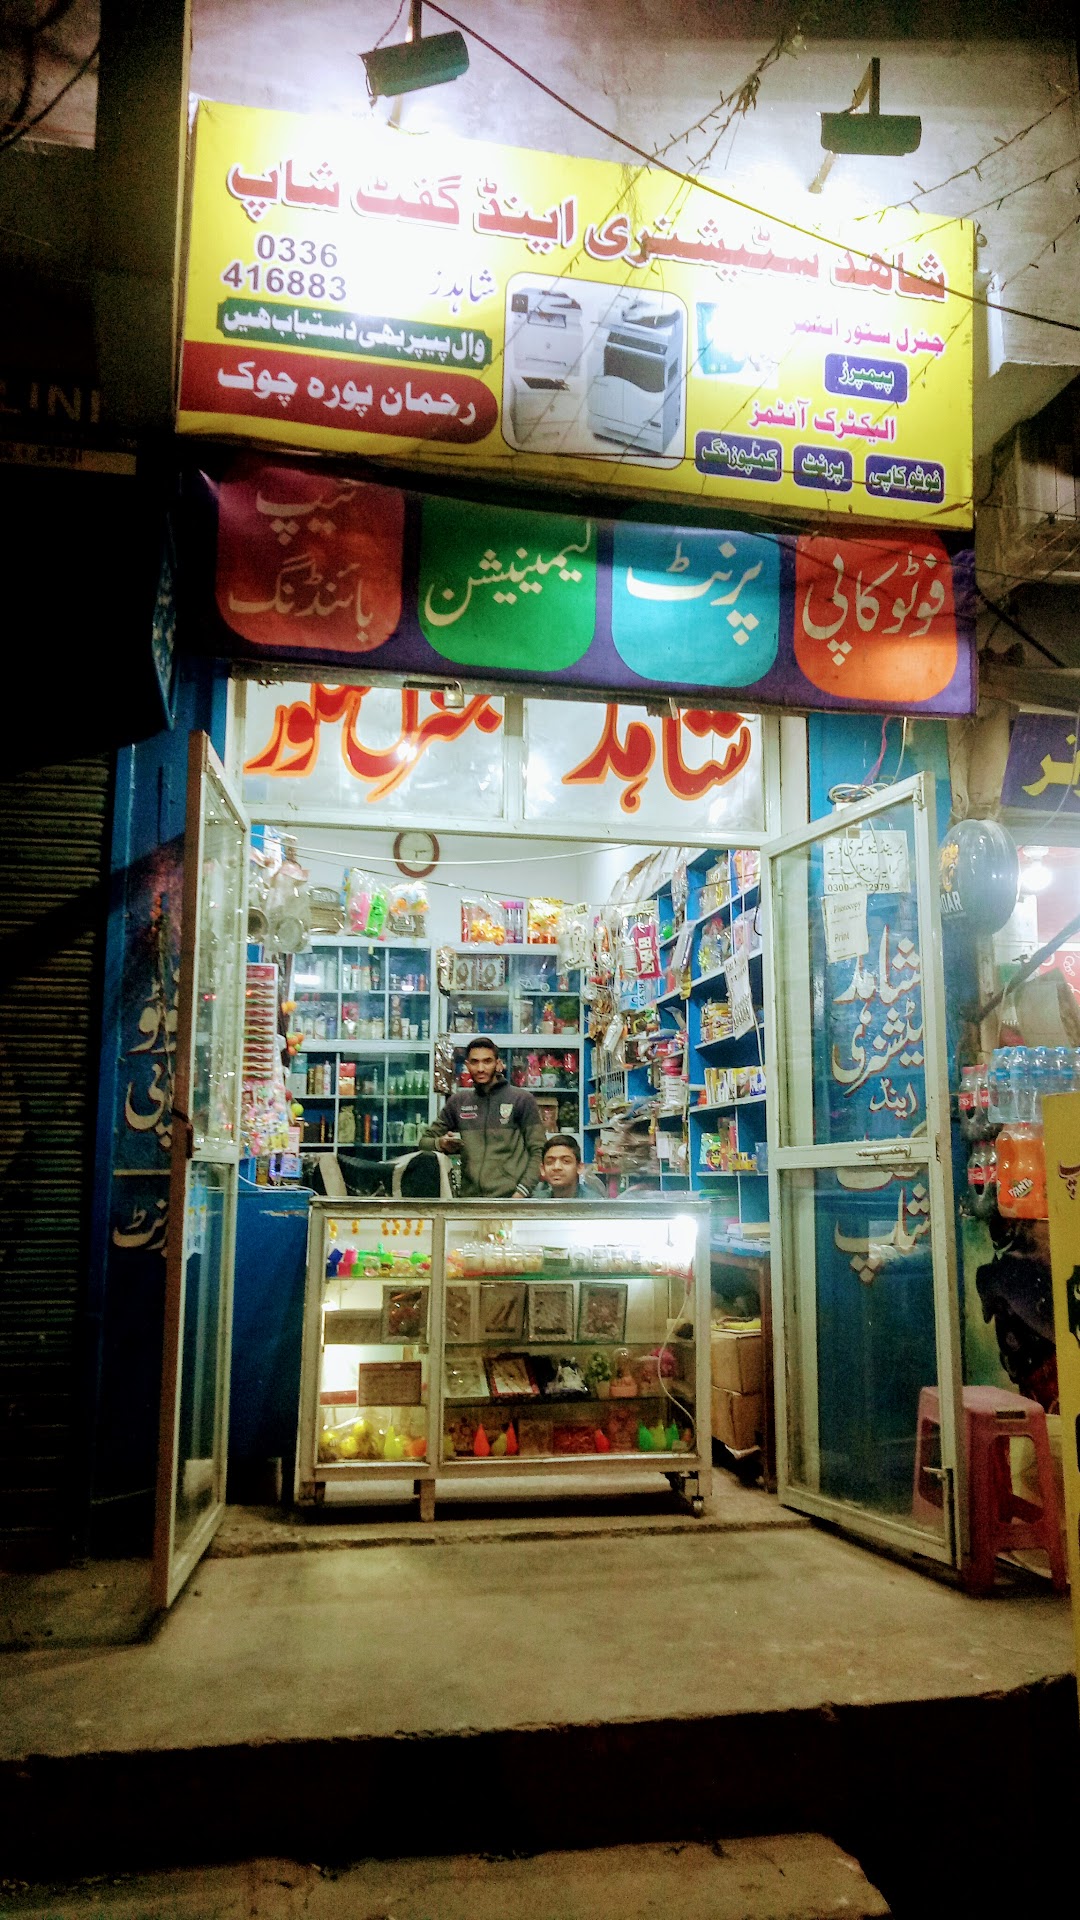 Shahid stationery and gift centre